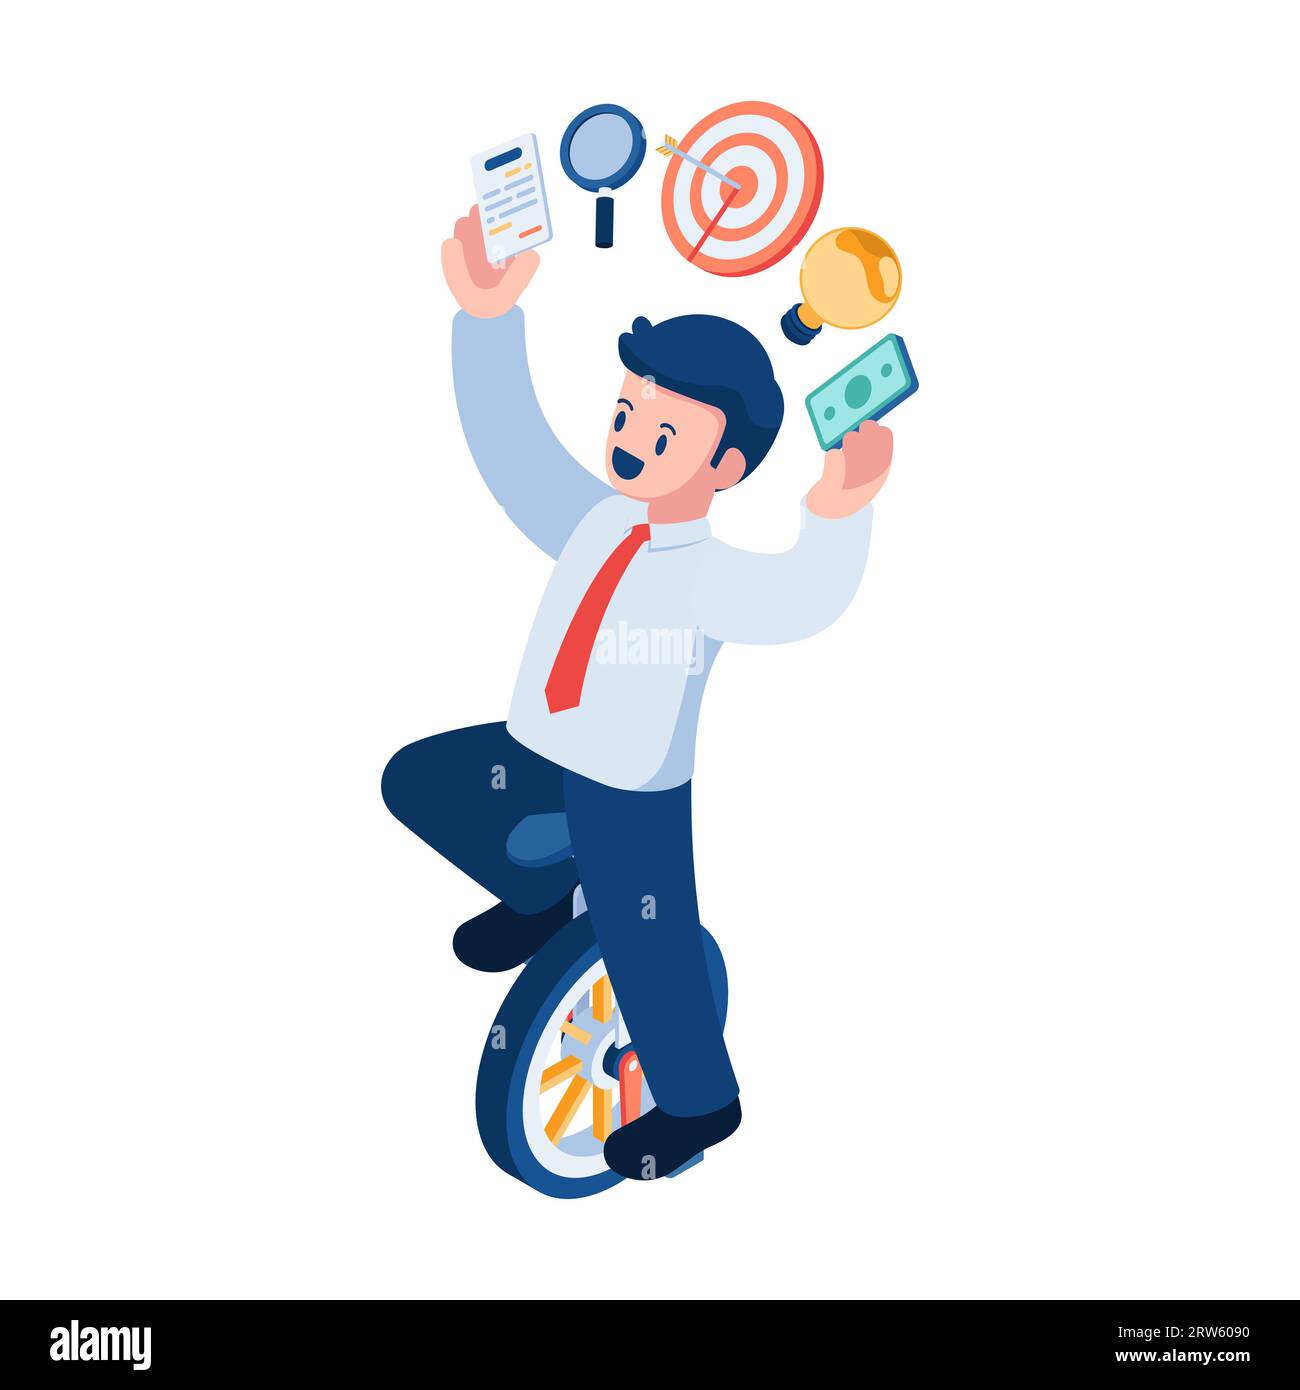 Flat 3d Isometric Businessman Riding Unicycle and Doing Multitasking Work. Multitasking Work and Time Management Concept. Stock Vector